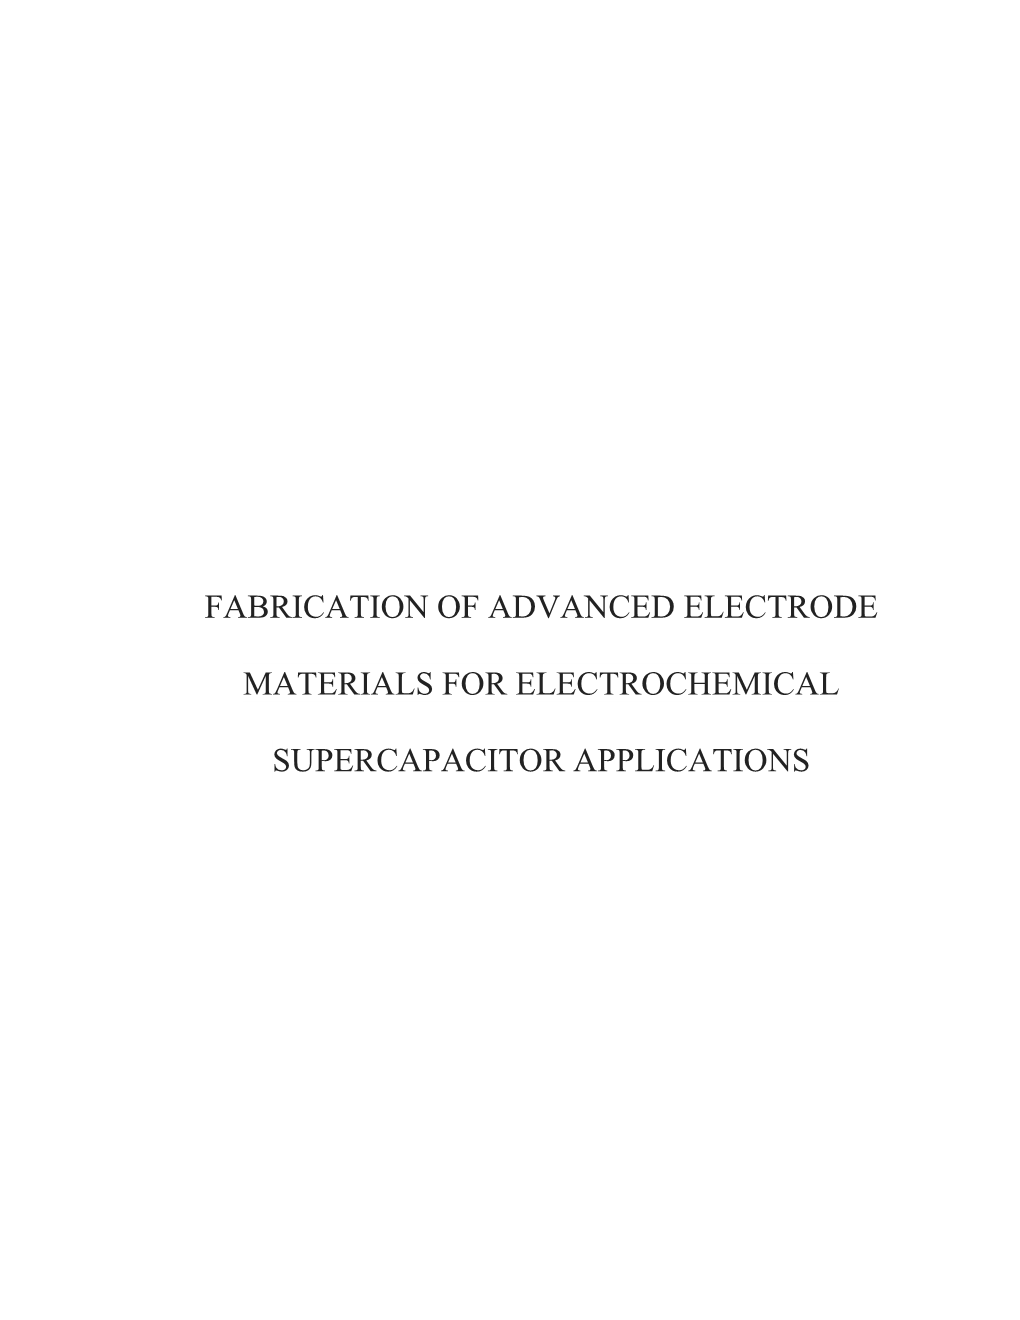 Fabrication of Advanced Electrode Materials for Electrochemical